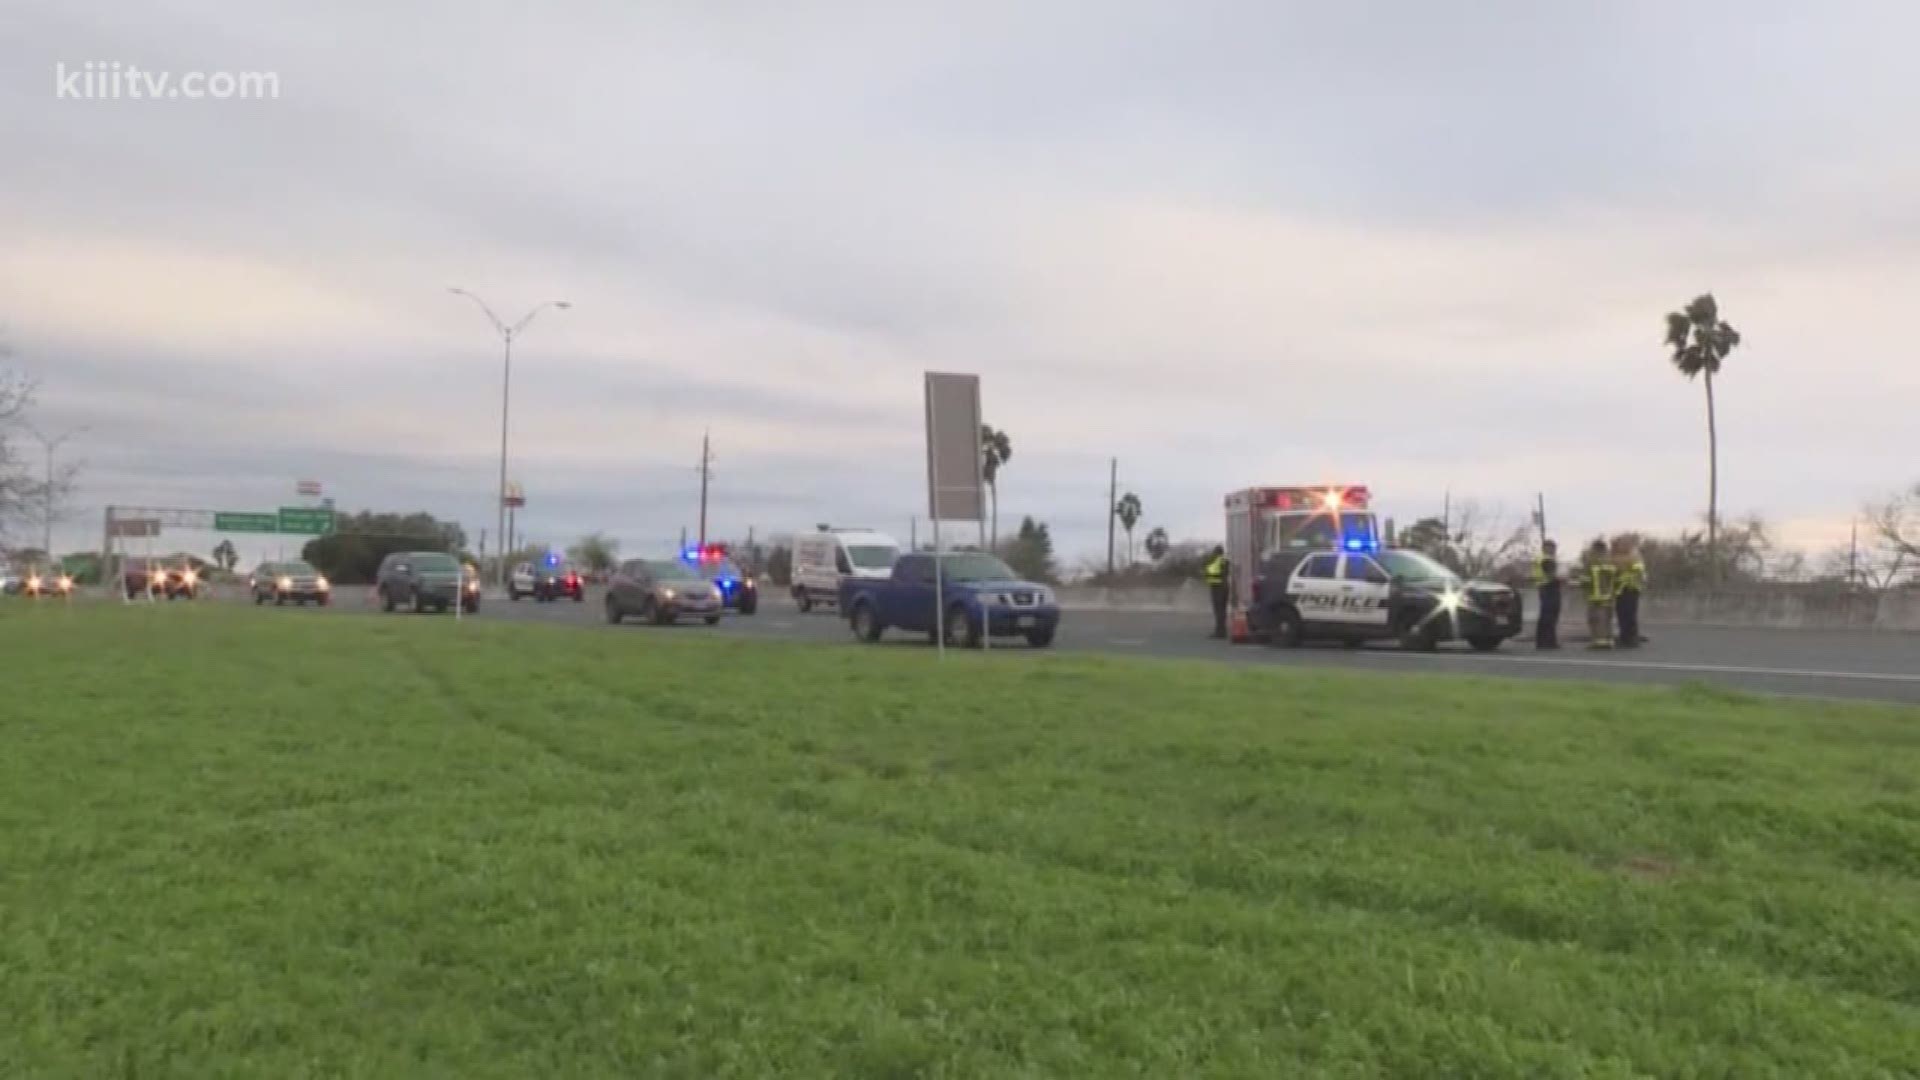 According to police, a group of pedestrians were crossing the freeway when one of them was hit.